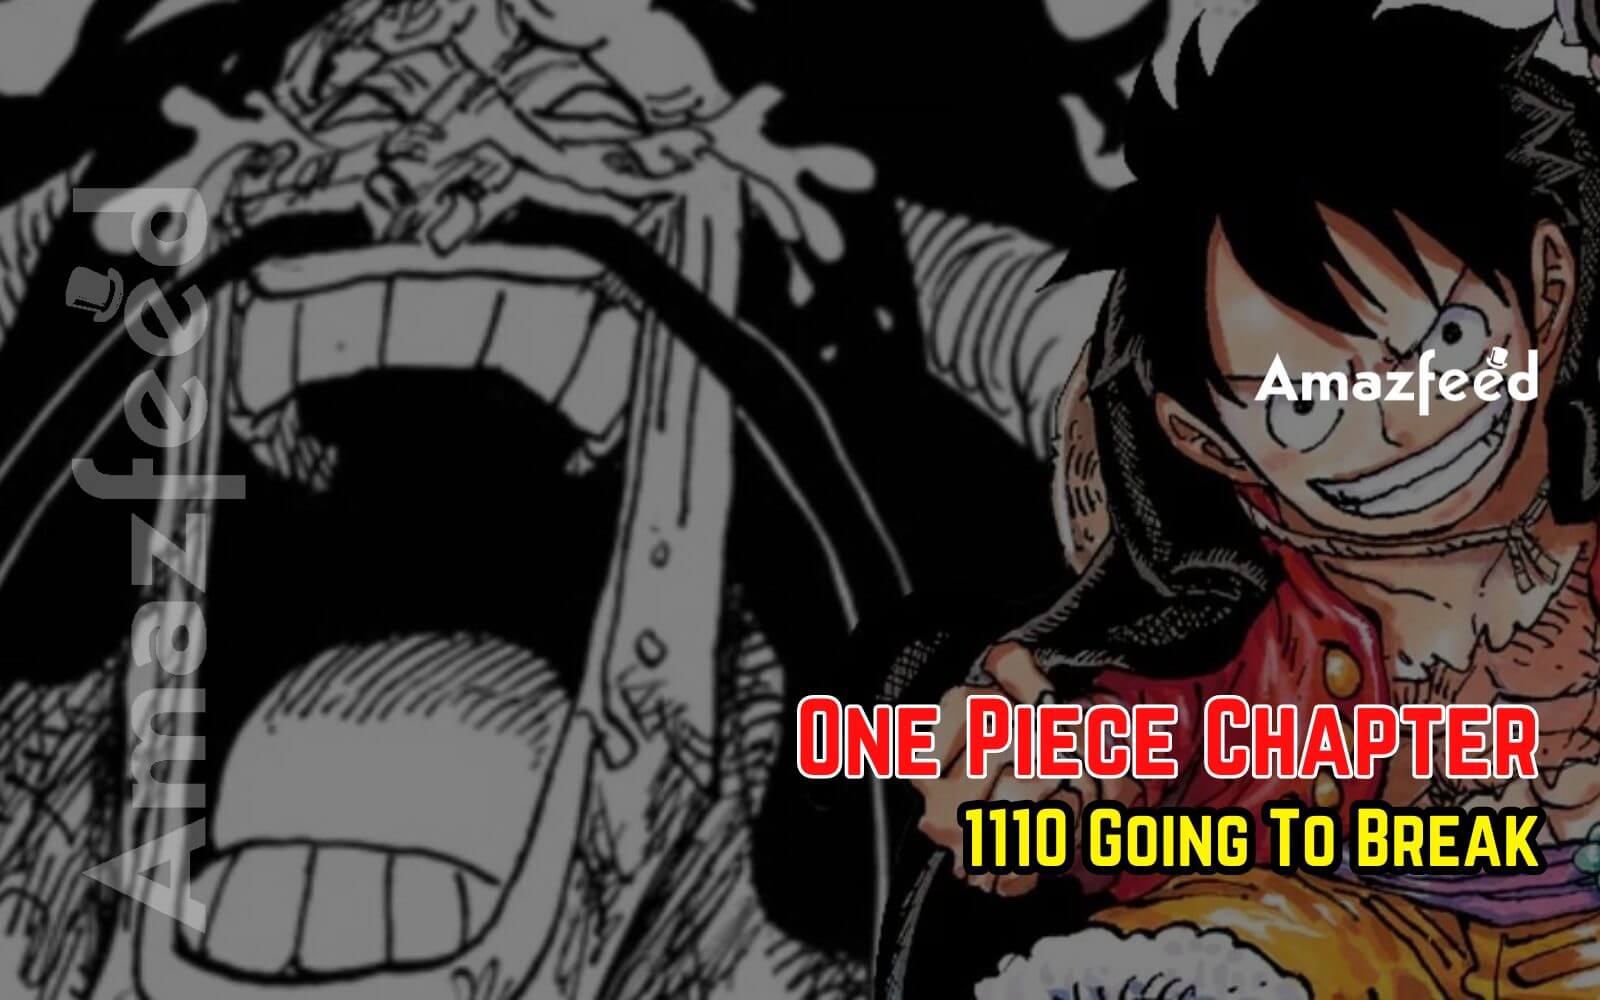 One Piece Chapter 1110 Going To Break